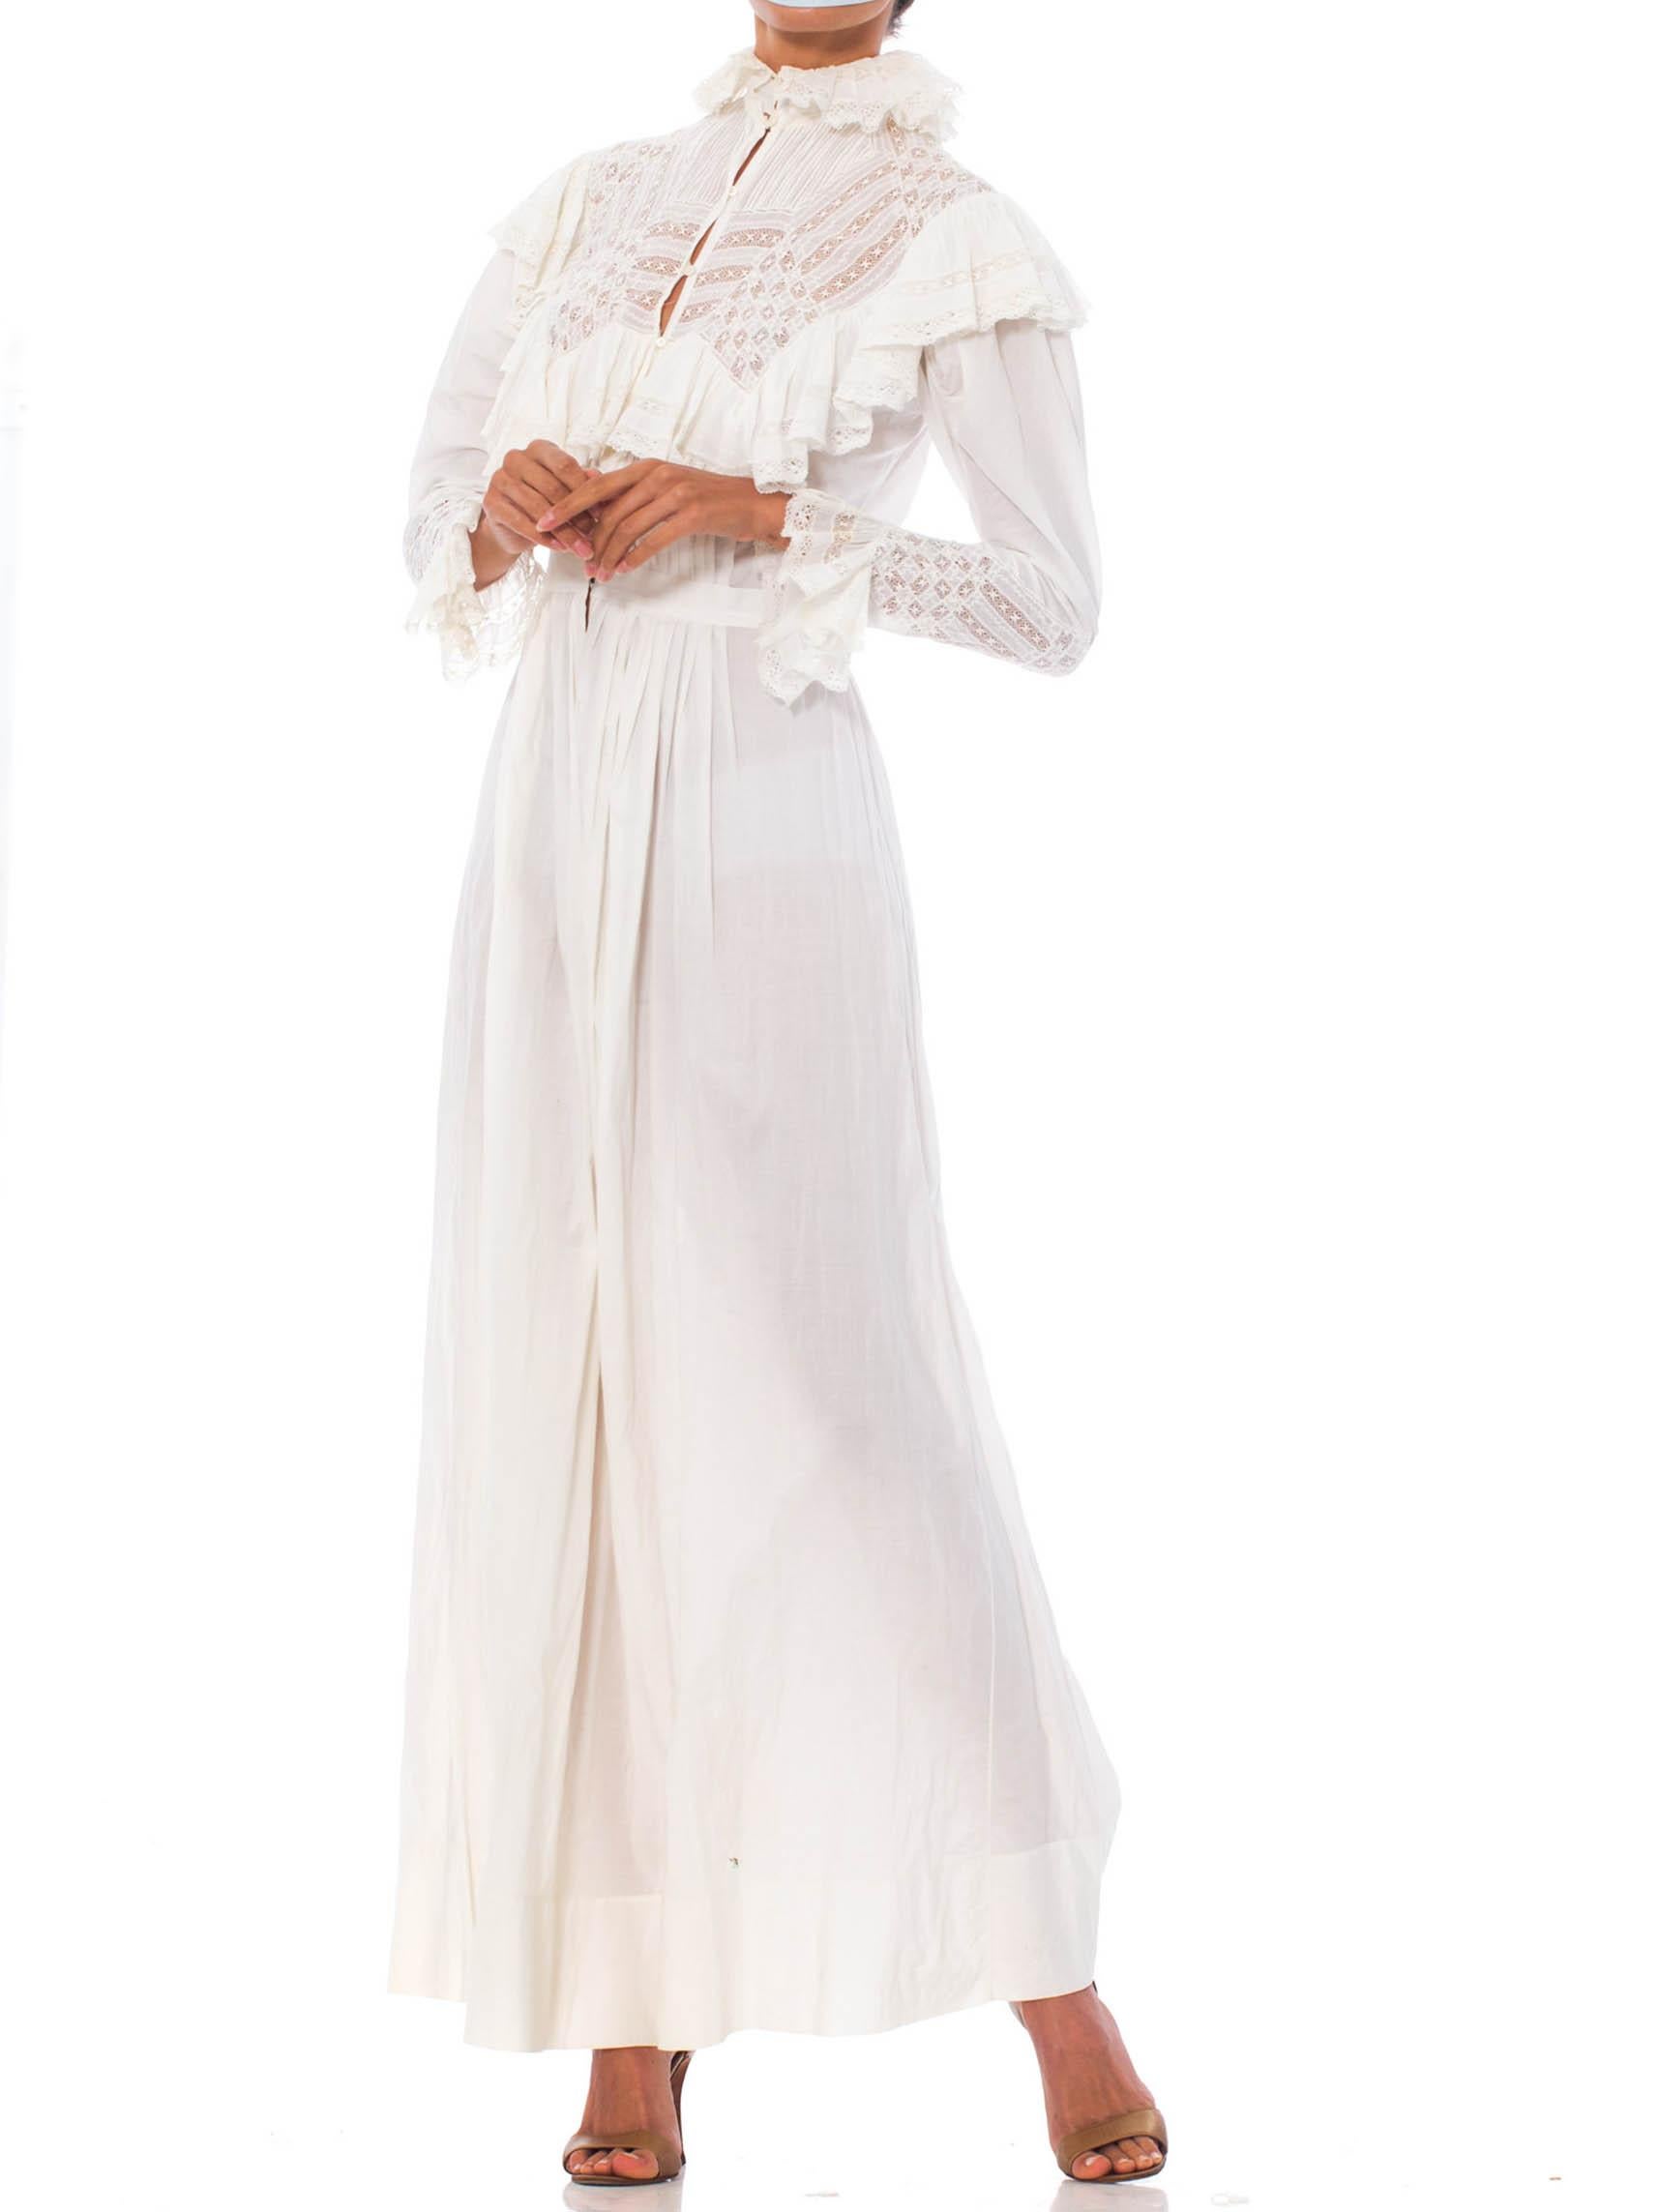 Victorian White Organic Cotton & Lace Belle Epoch Sleeve House Dress With Sash Tie Ruffles